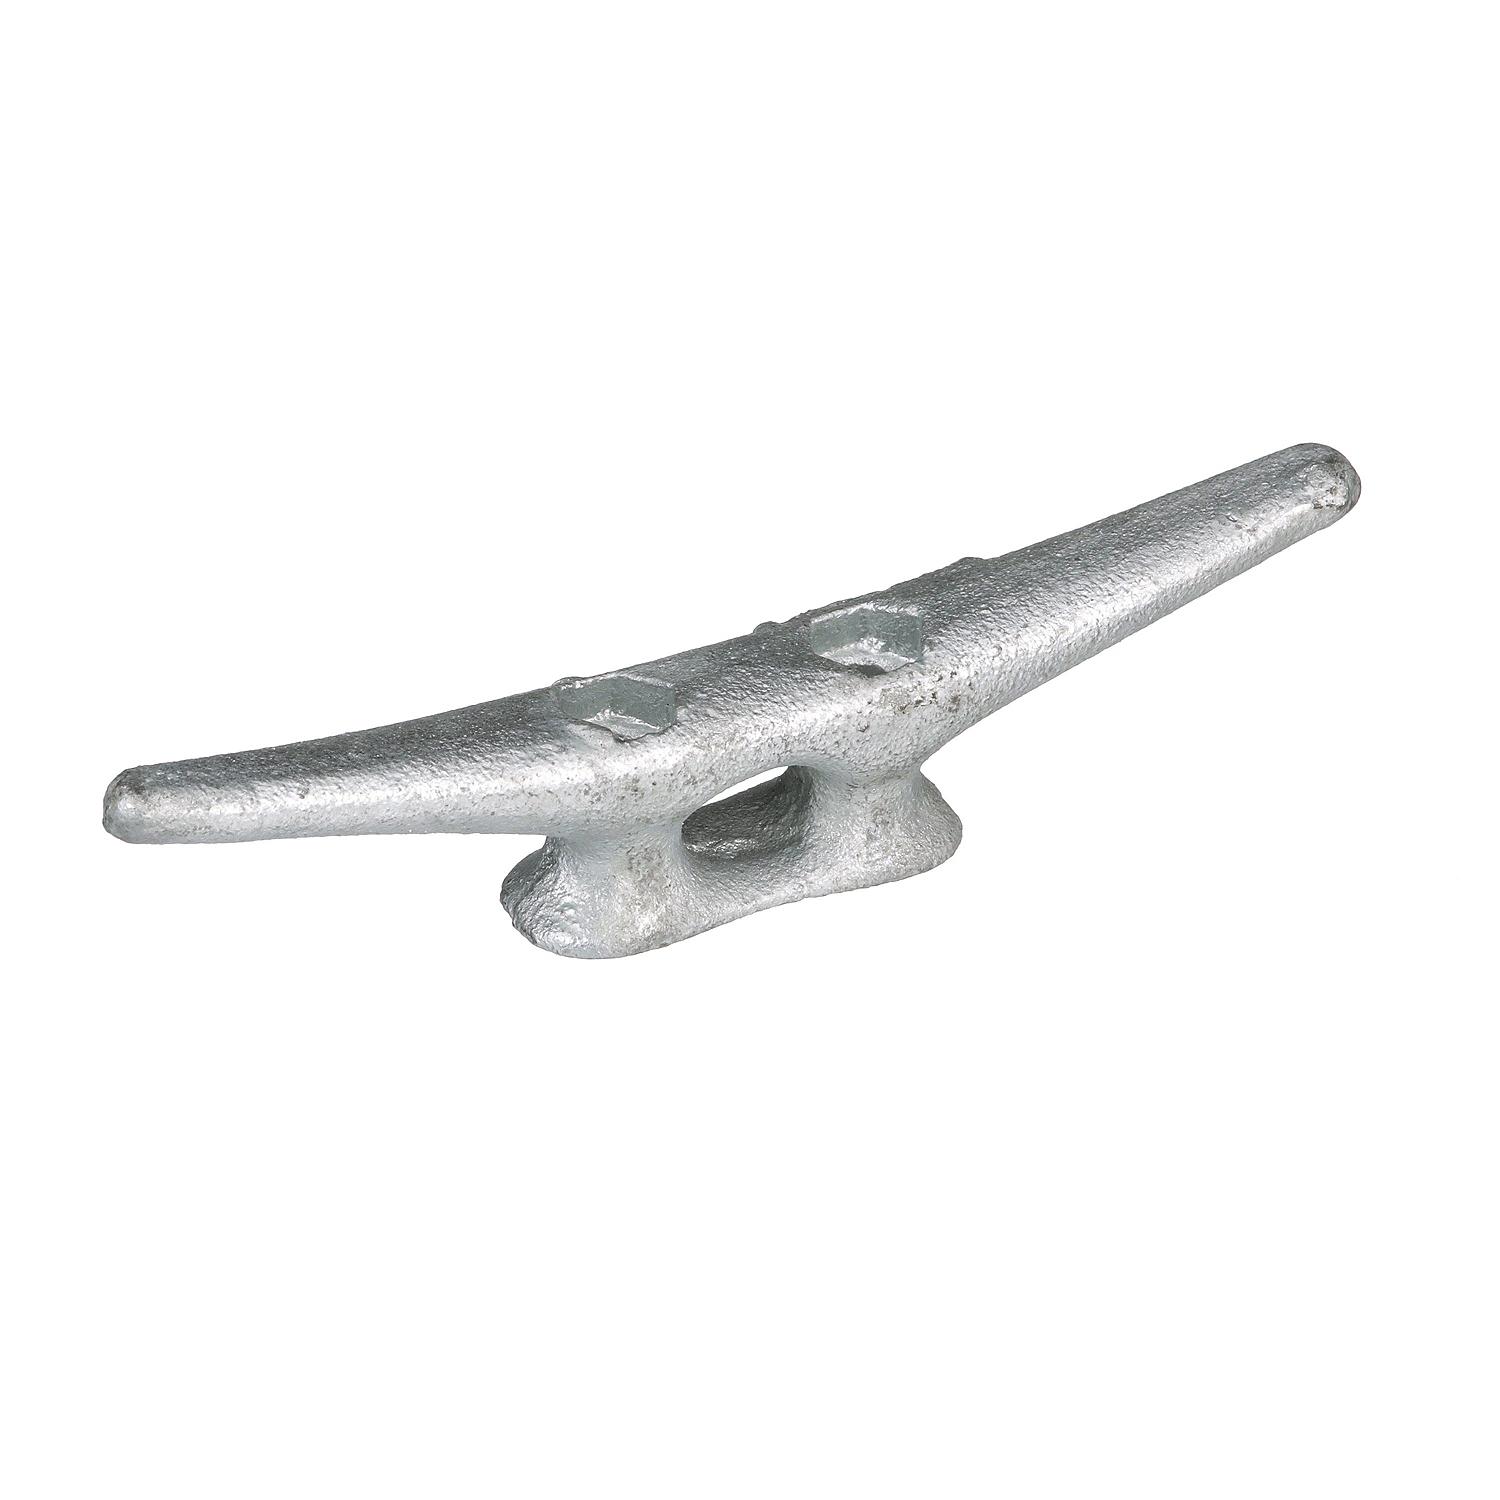 Seachoice Open Based Galvanized Dock Cleat - image 4 of 5